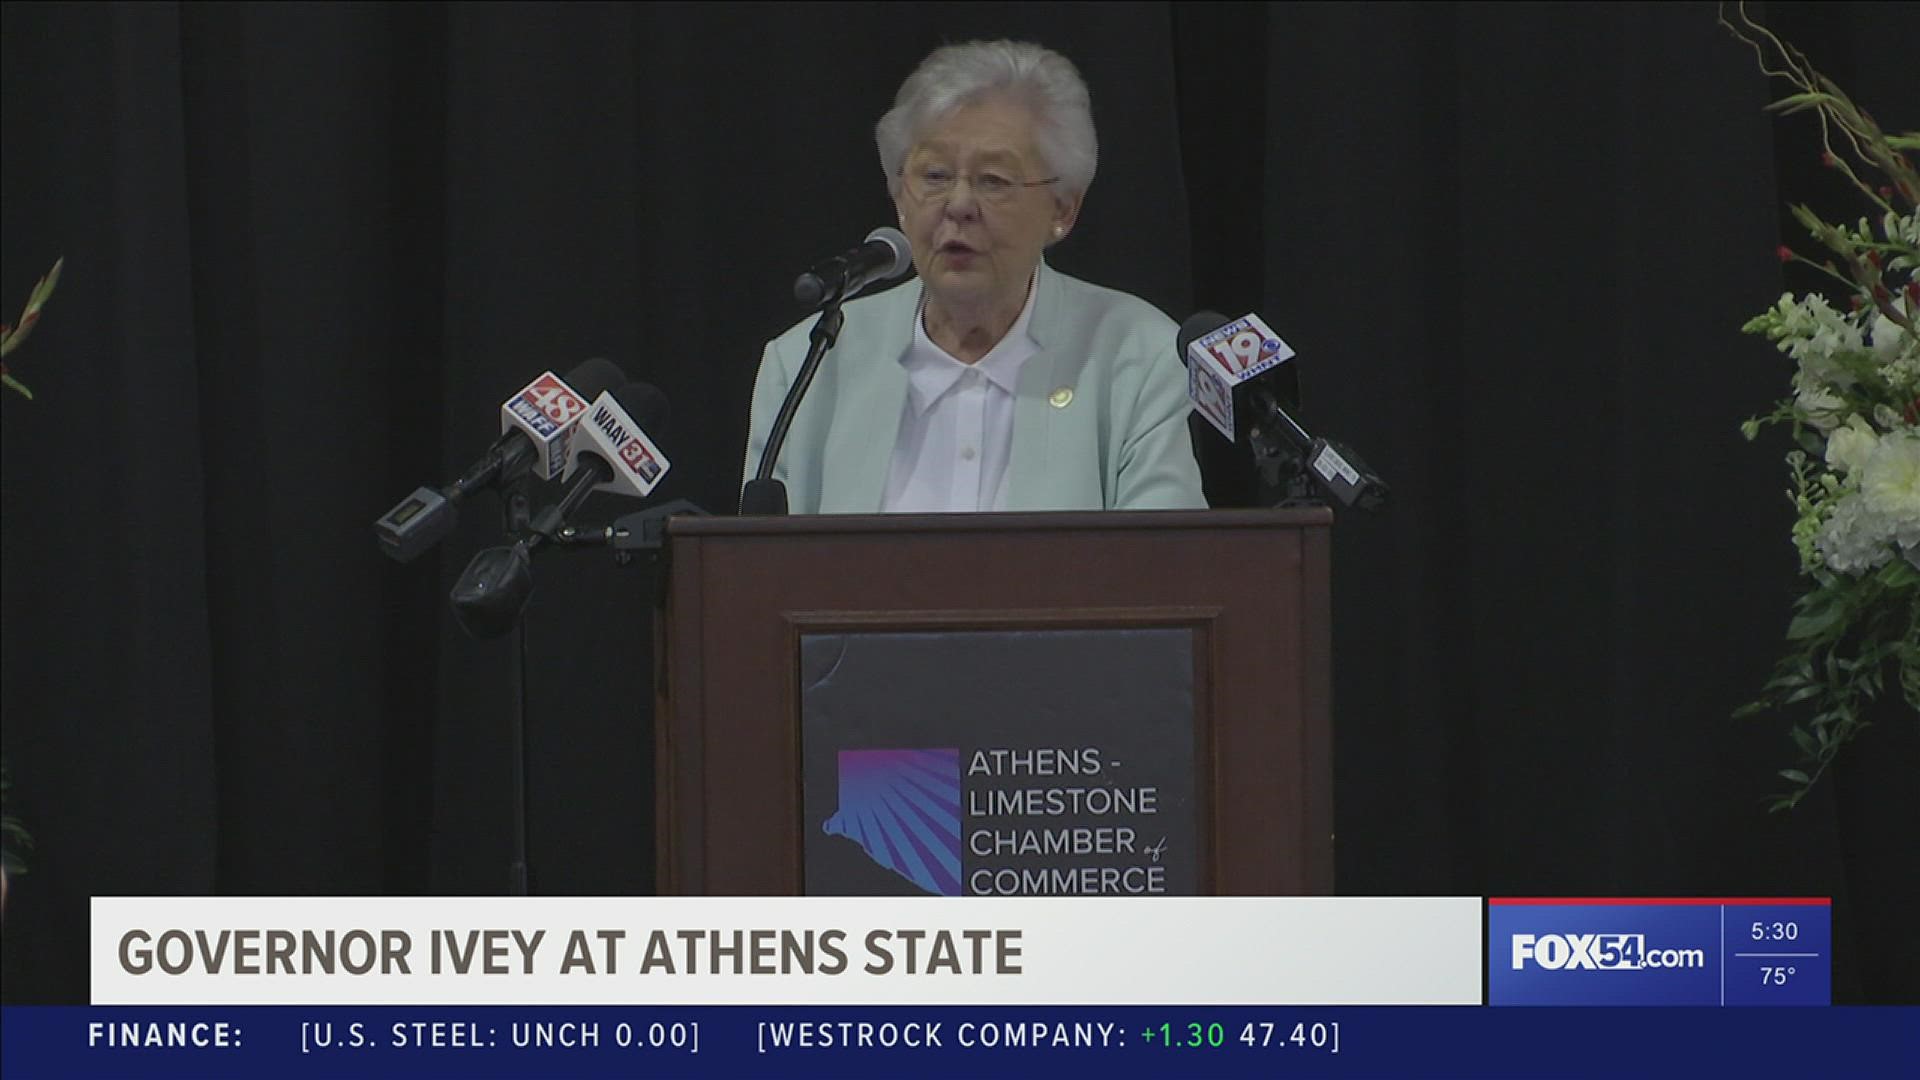 Governor Kay Ivey was at Athens State today as keynote speaker at Athens Limestone Chamber of Commerce luncheon.